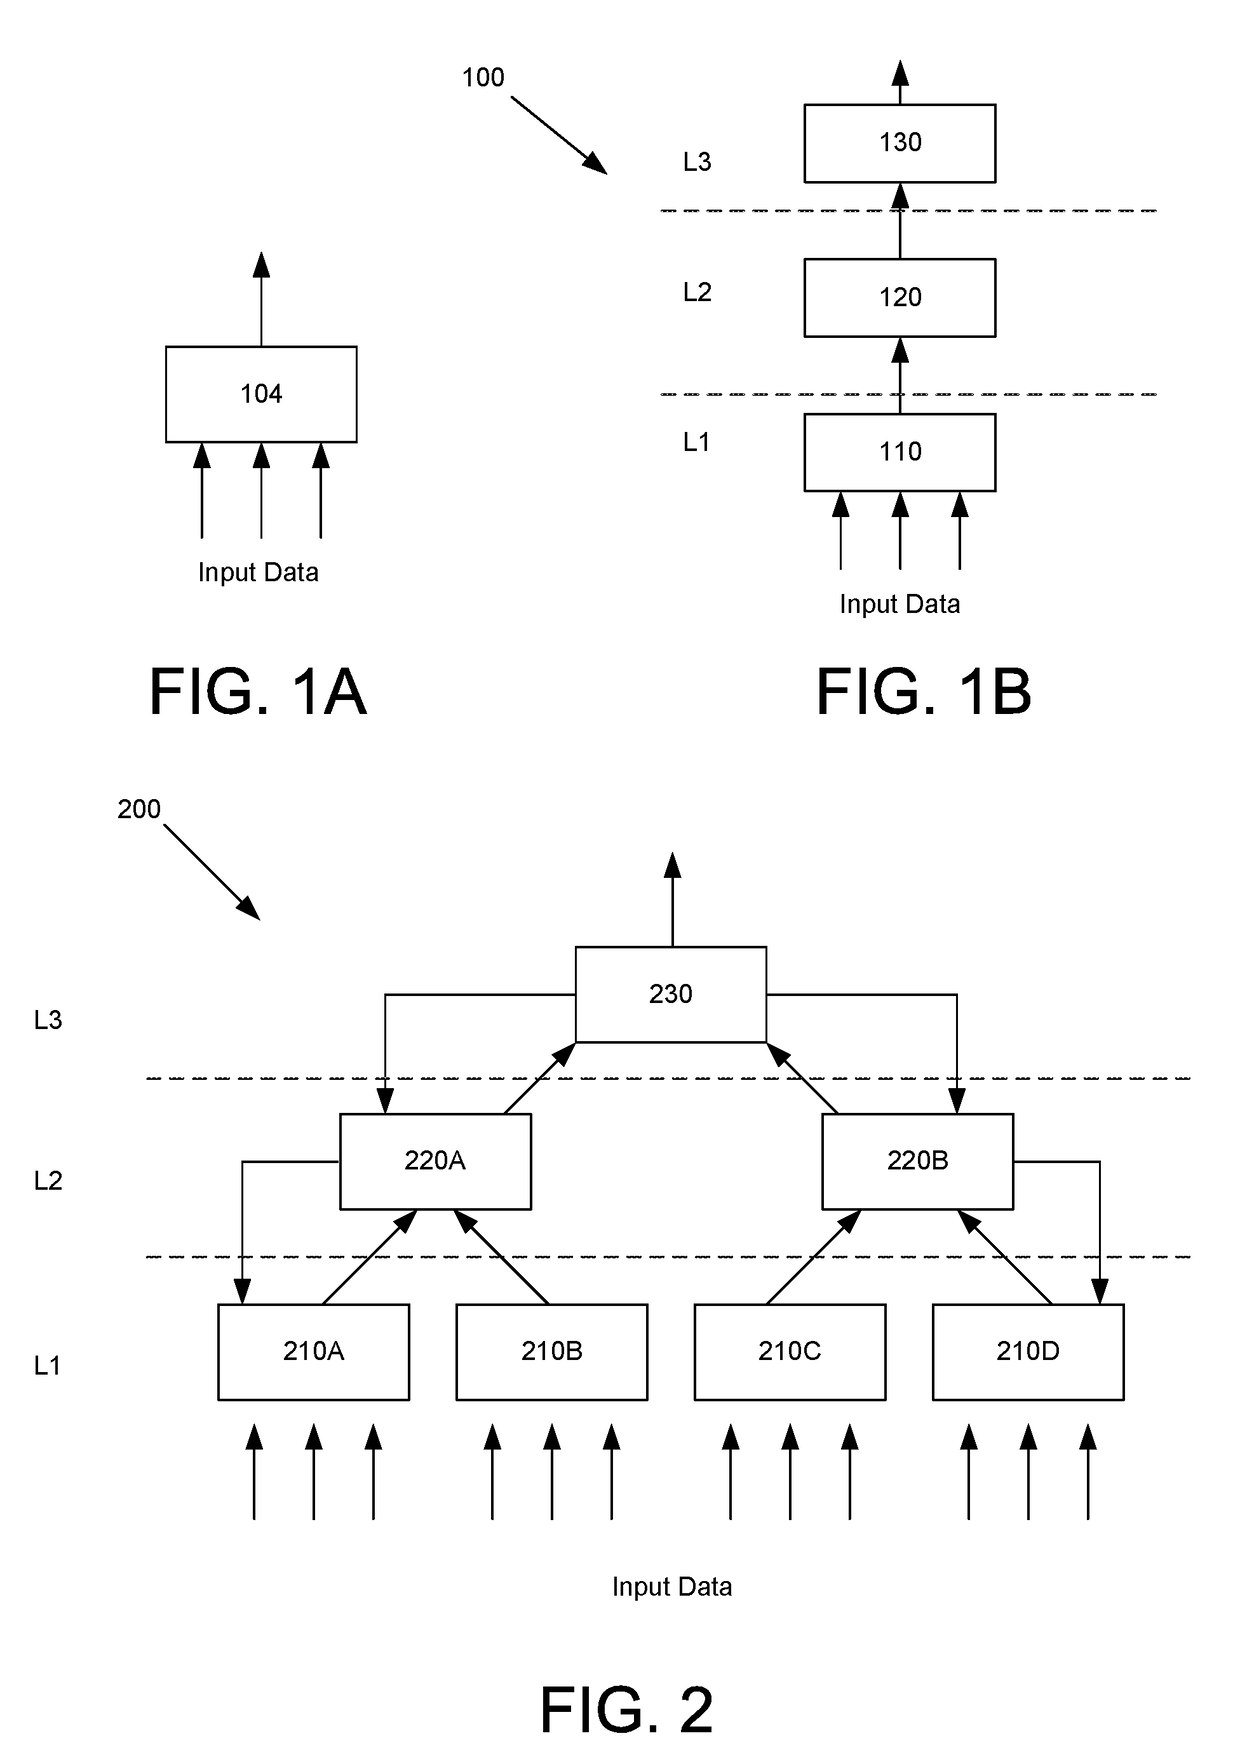 Feedback mechanisms in sequence learning systems with temporal processing capability